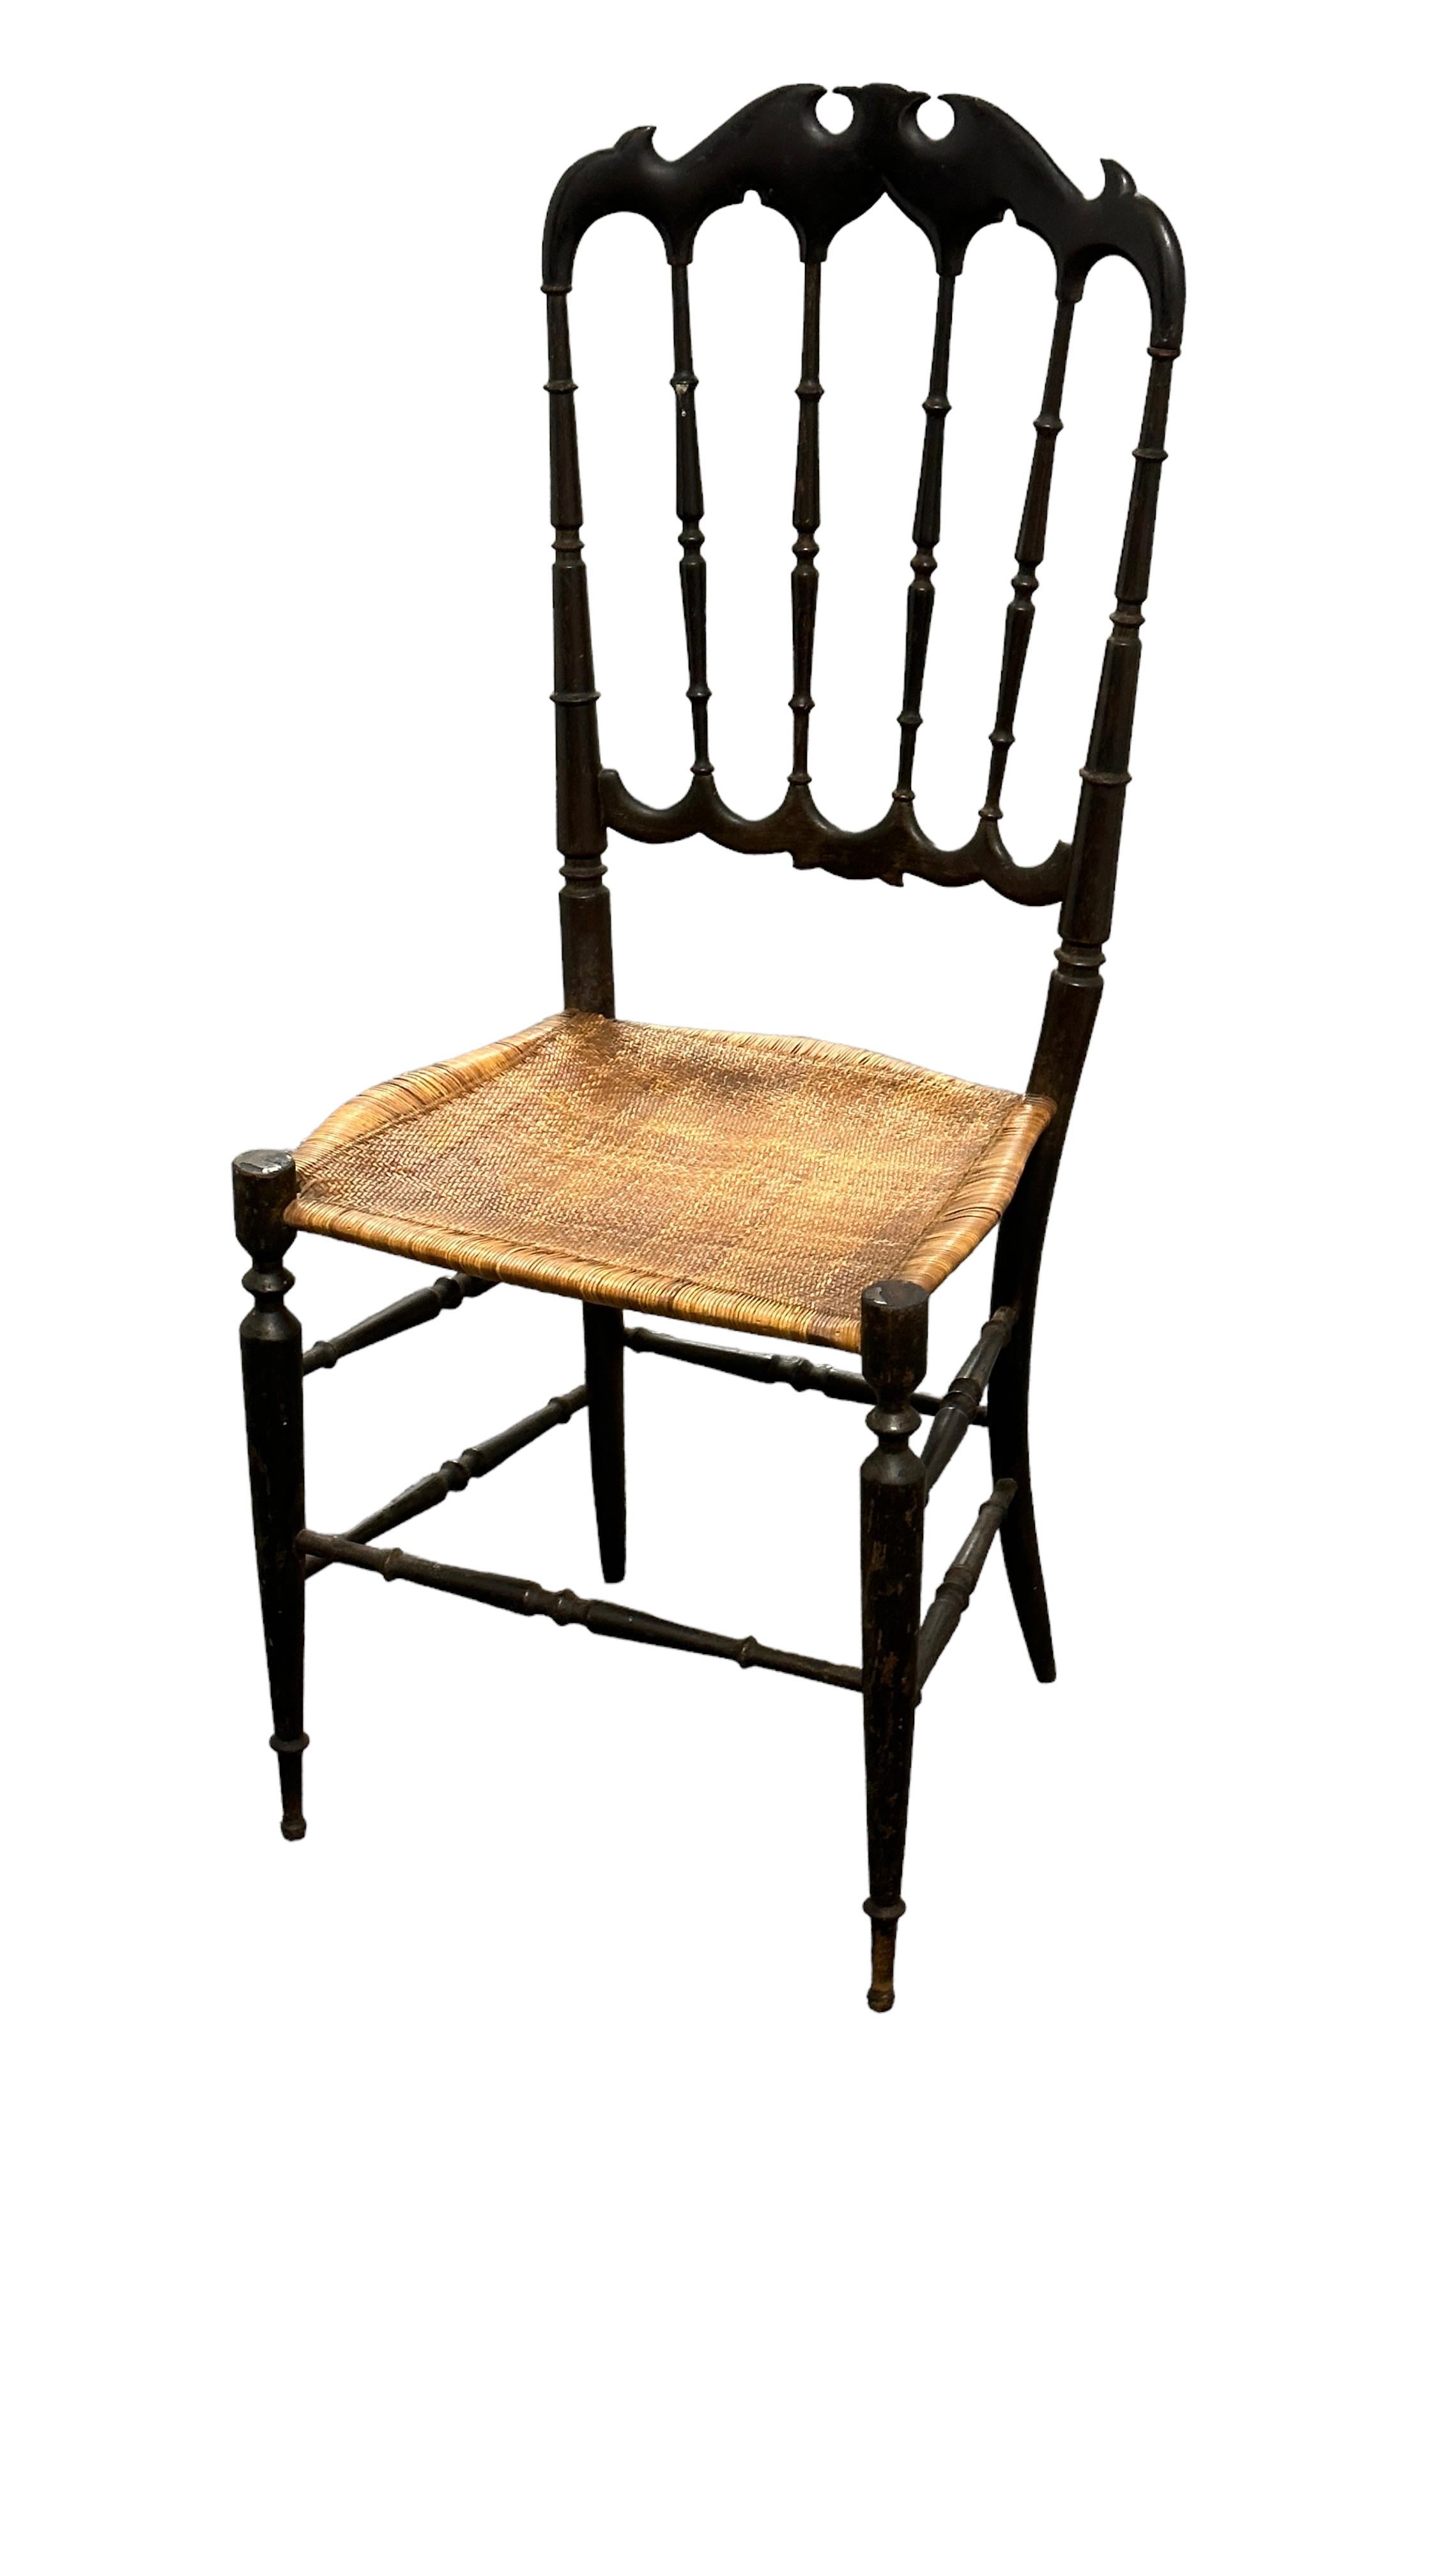 Beautiful Chiavari Wooden Chair Wicker Seat, Made in Liguria, Italy, 1930s For Sale 1